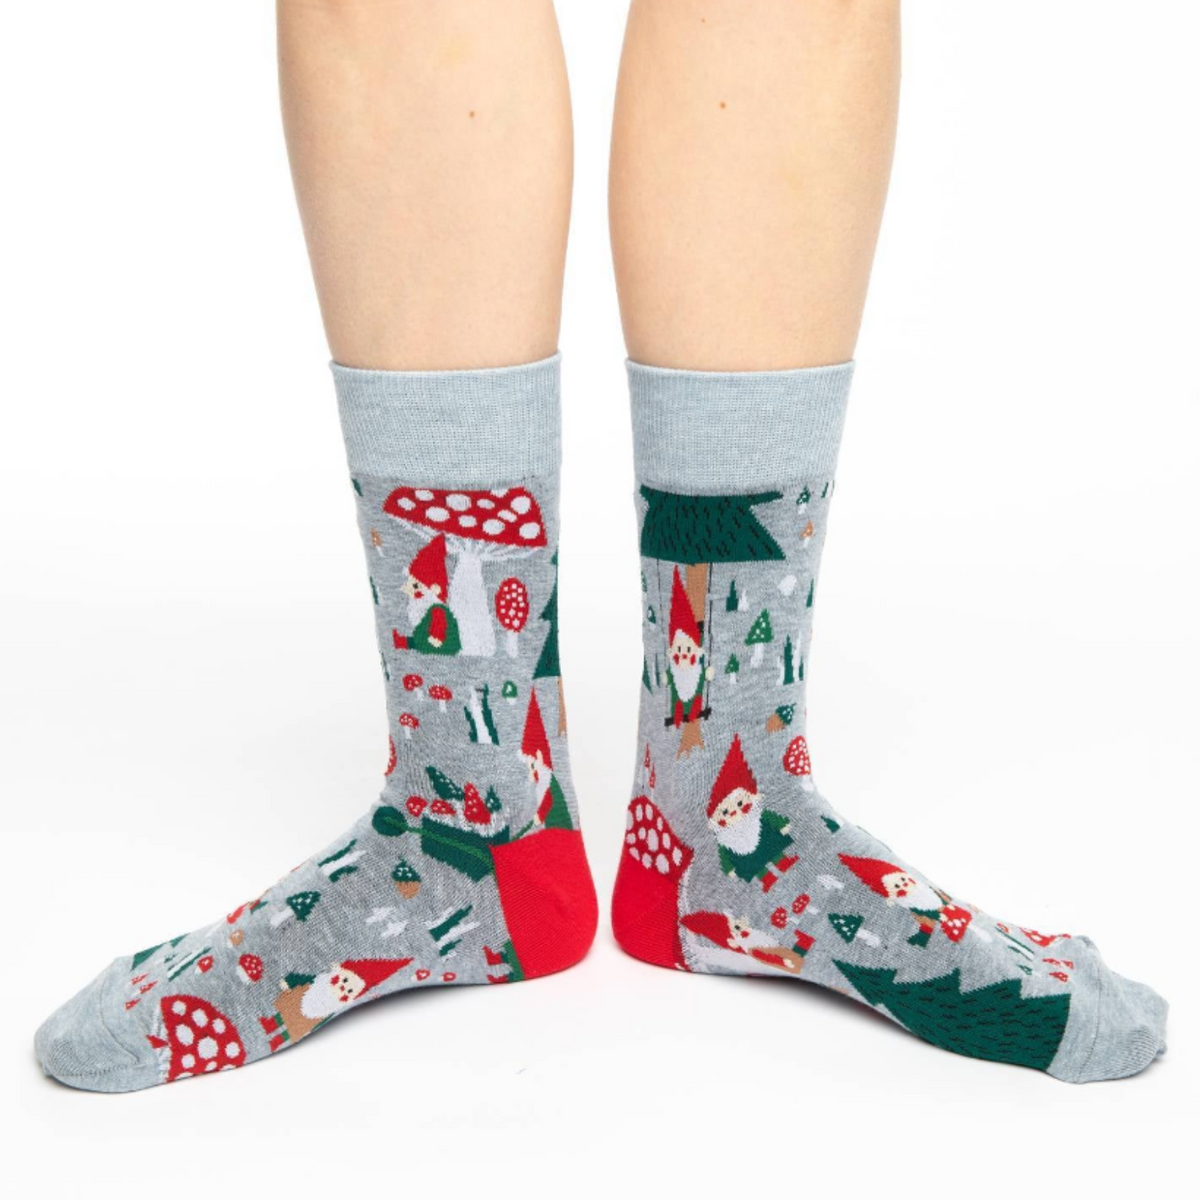 Good Luck Sock Woodland Gnomes women&#39;s and men&#39;s crew socks featuring gray sock with gnomes in red hats, mushrooms, and trees all over. Socks worn by female model. 